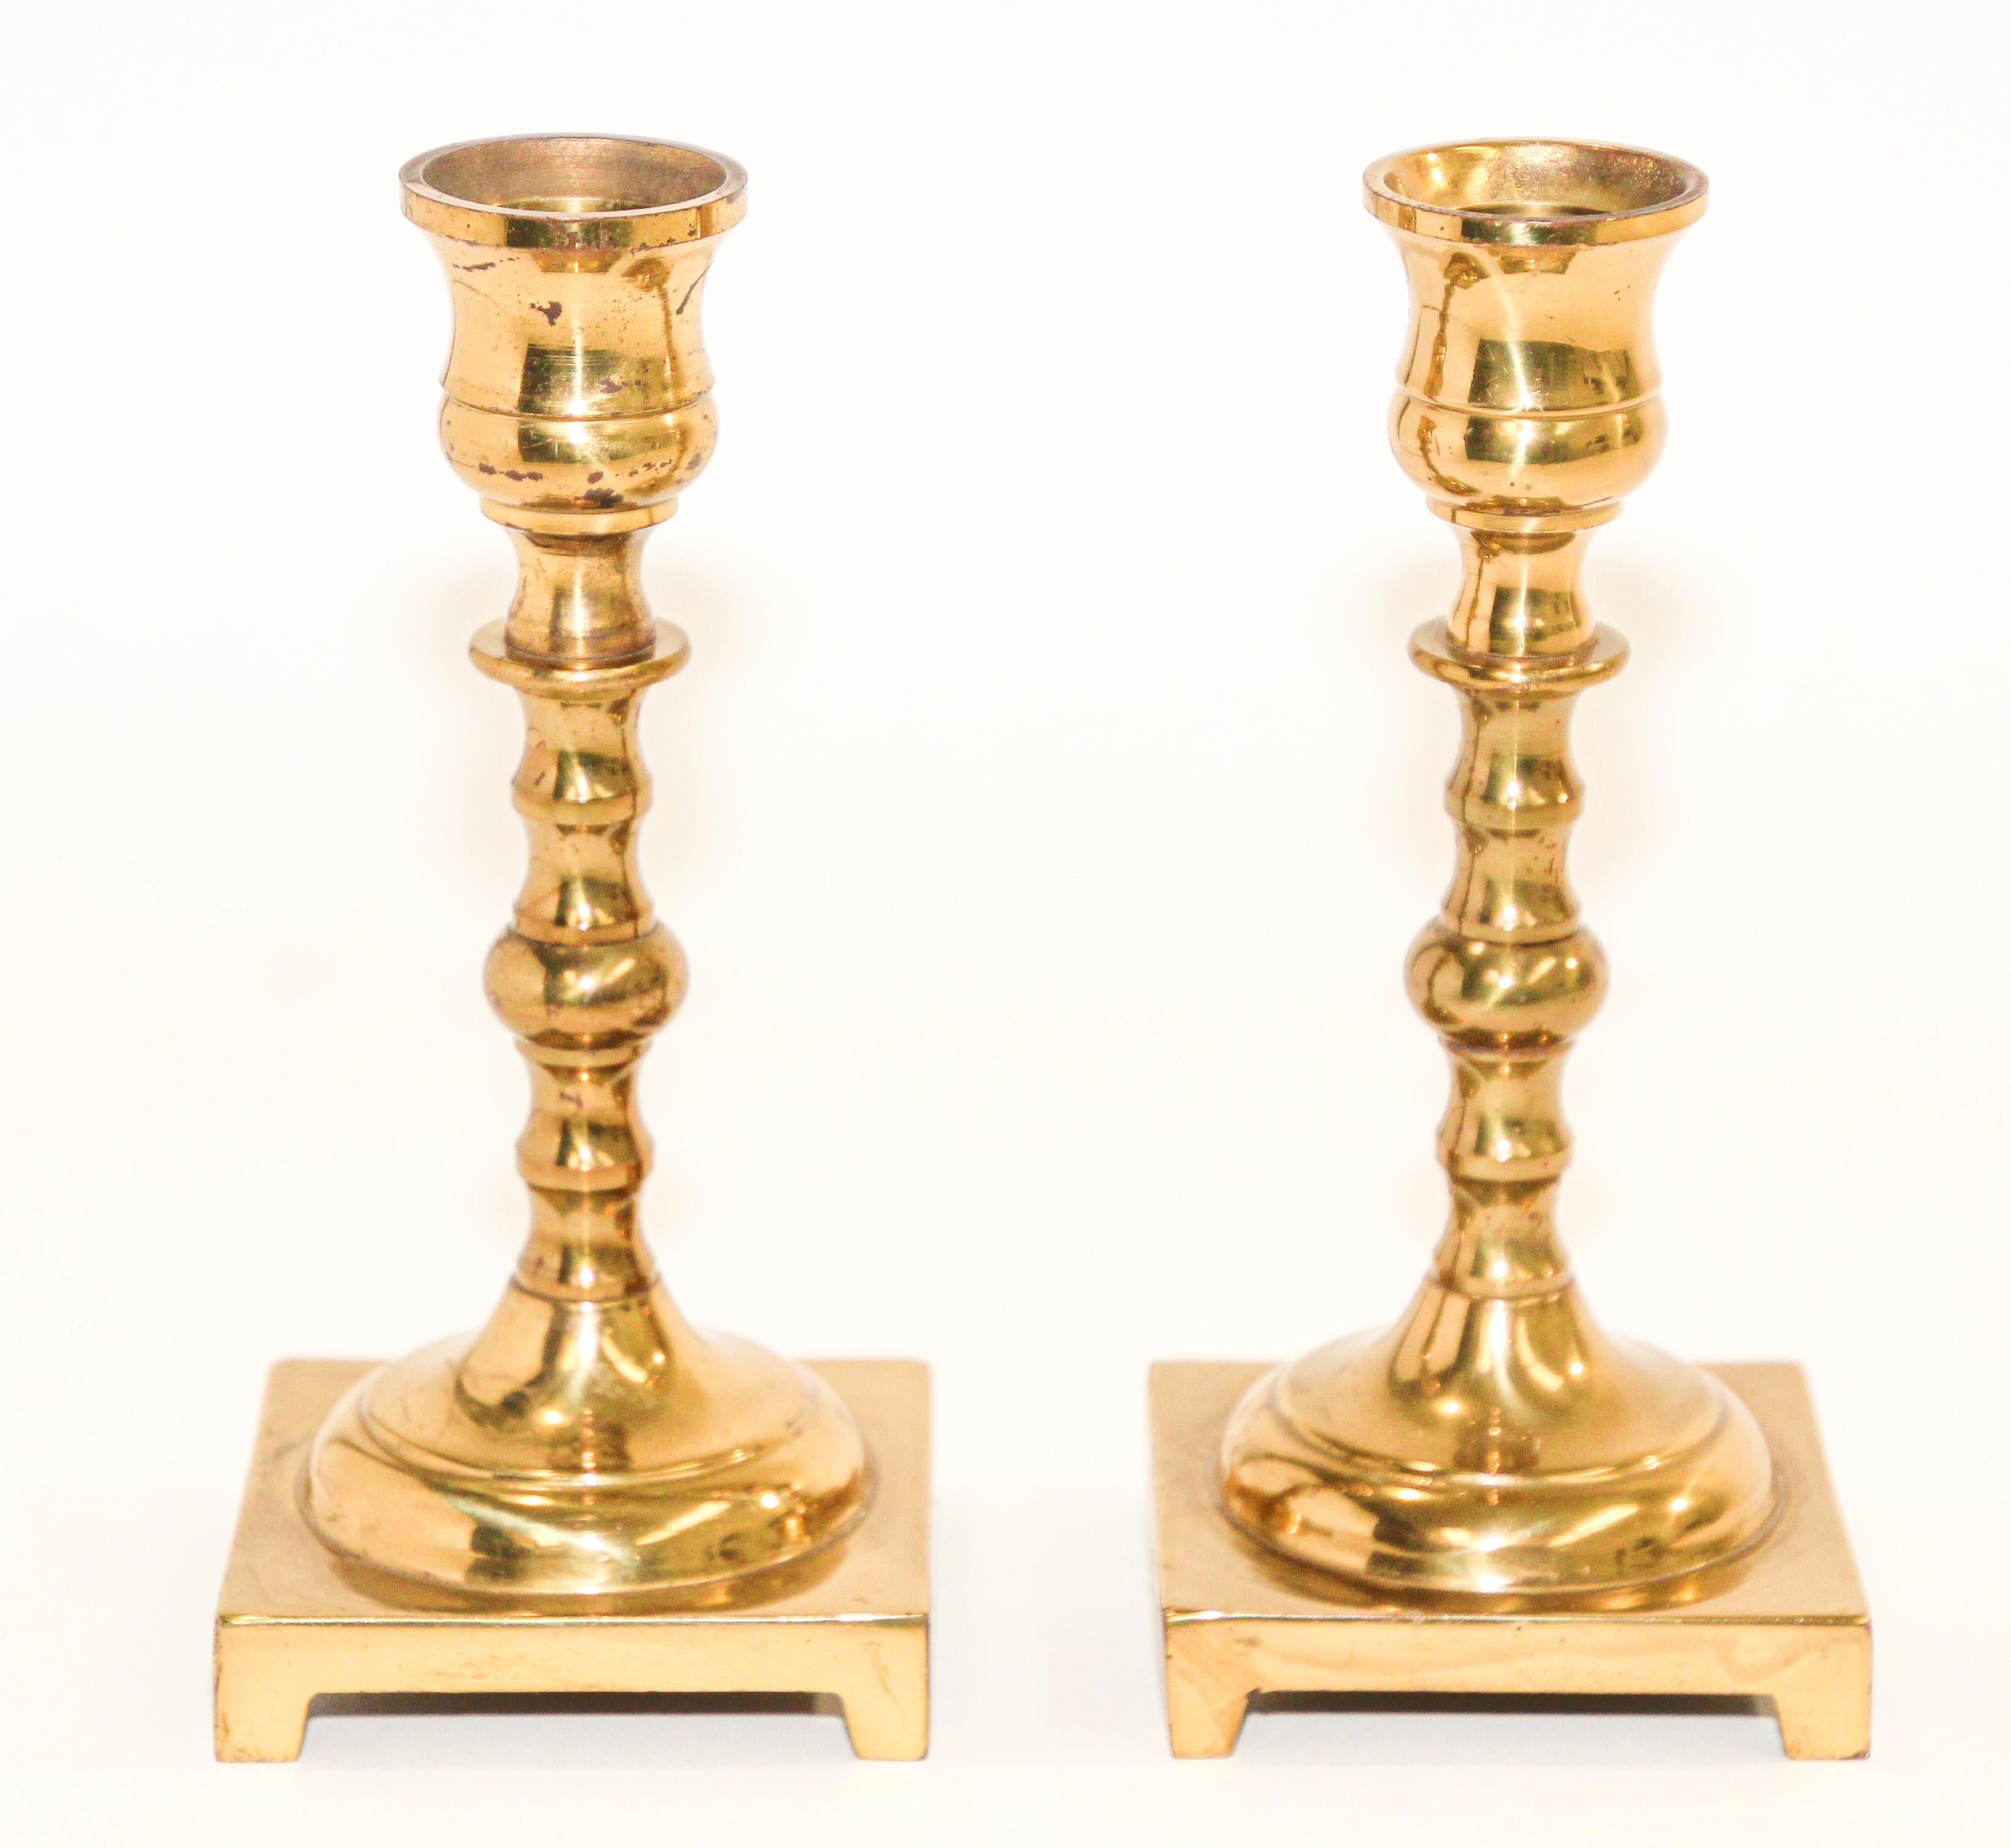 Pair of Georgian polished brass candlesticks, candle holder with square base.
Fine small pair of solid polished brass English candlesticks.
Polished by hand in our workshop. (We go through the laborious task of hand polishing because it does not